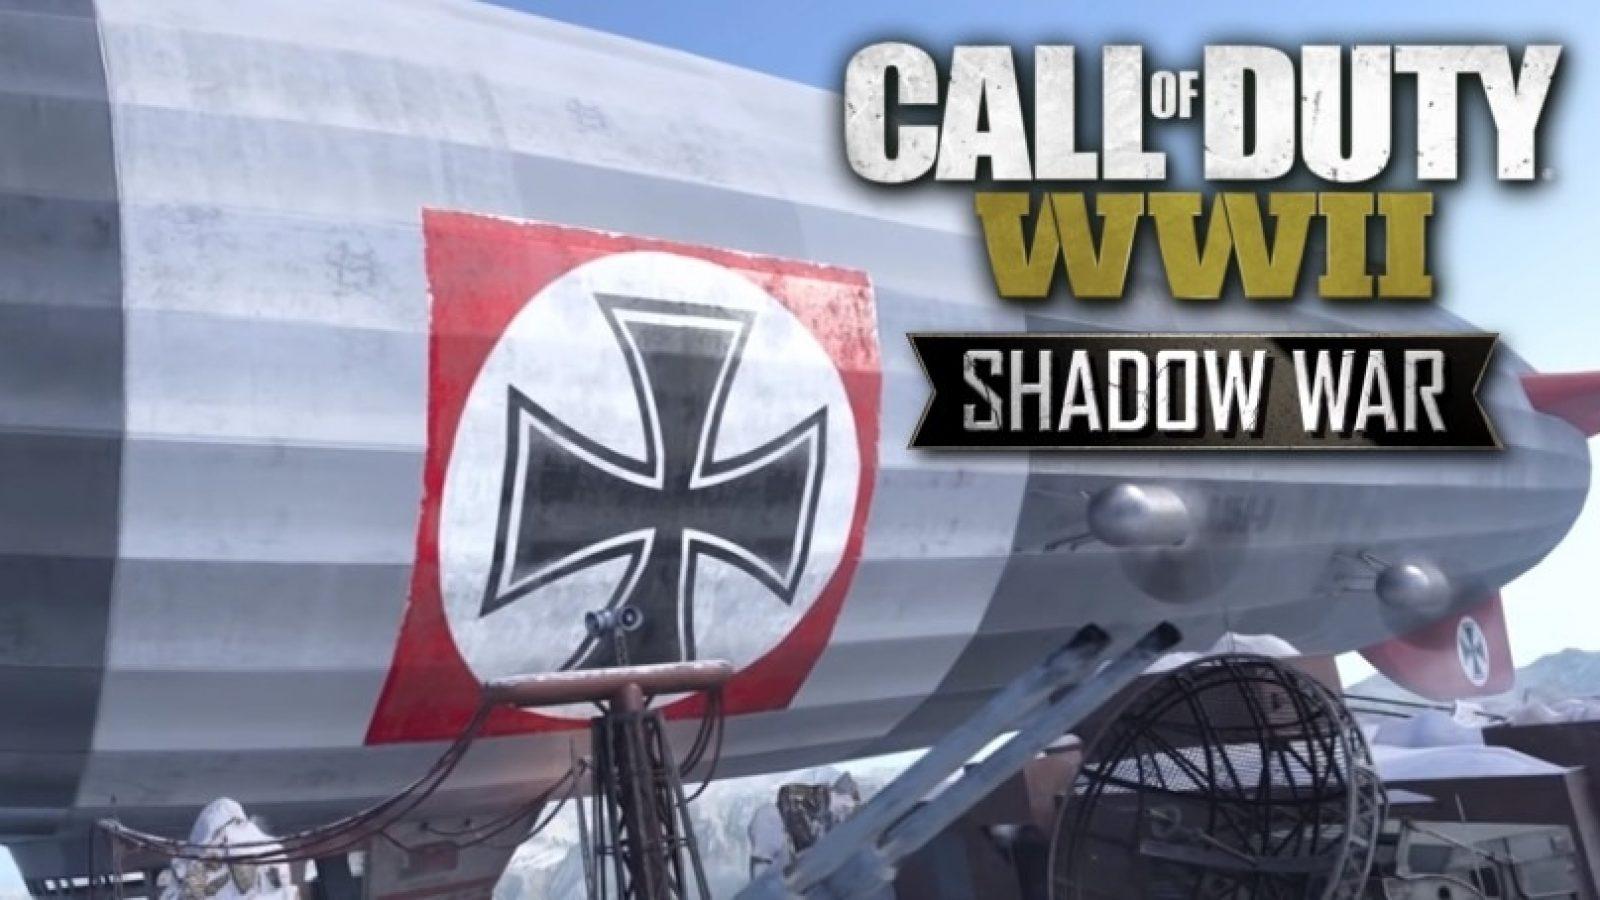 Call of Duty®: WWII - Shadow War: DLC Pack 4